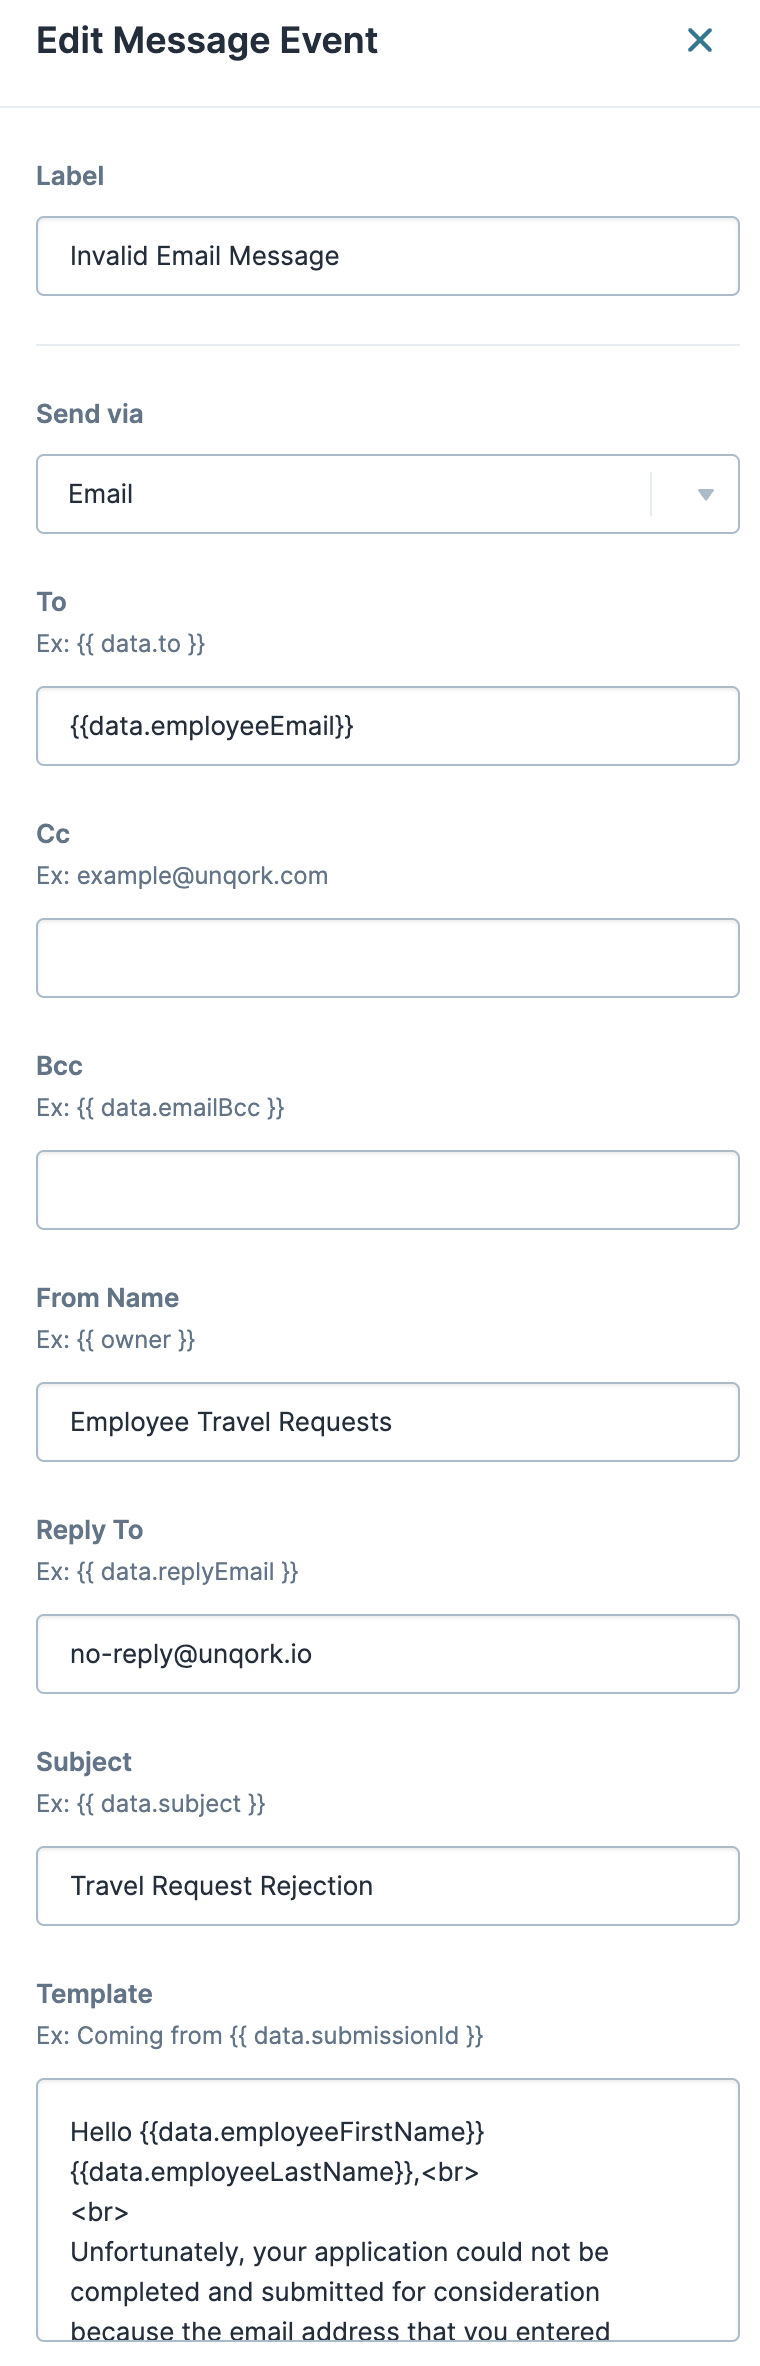 Image displaying the Message node configuration that notifies invalid email address domains that their travel request application has been denied. 